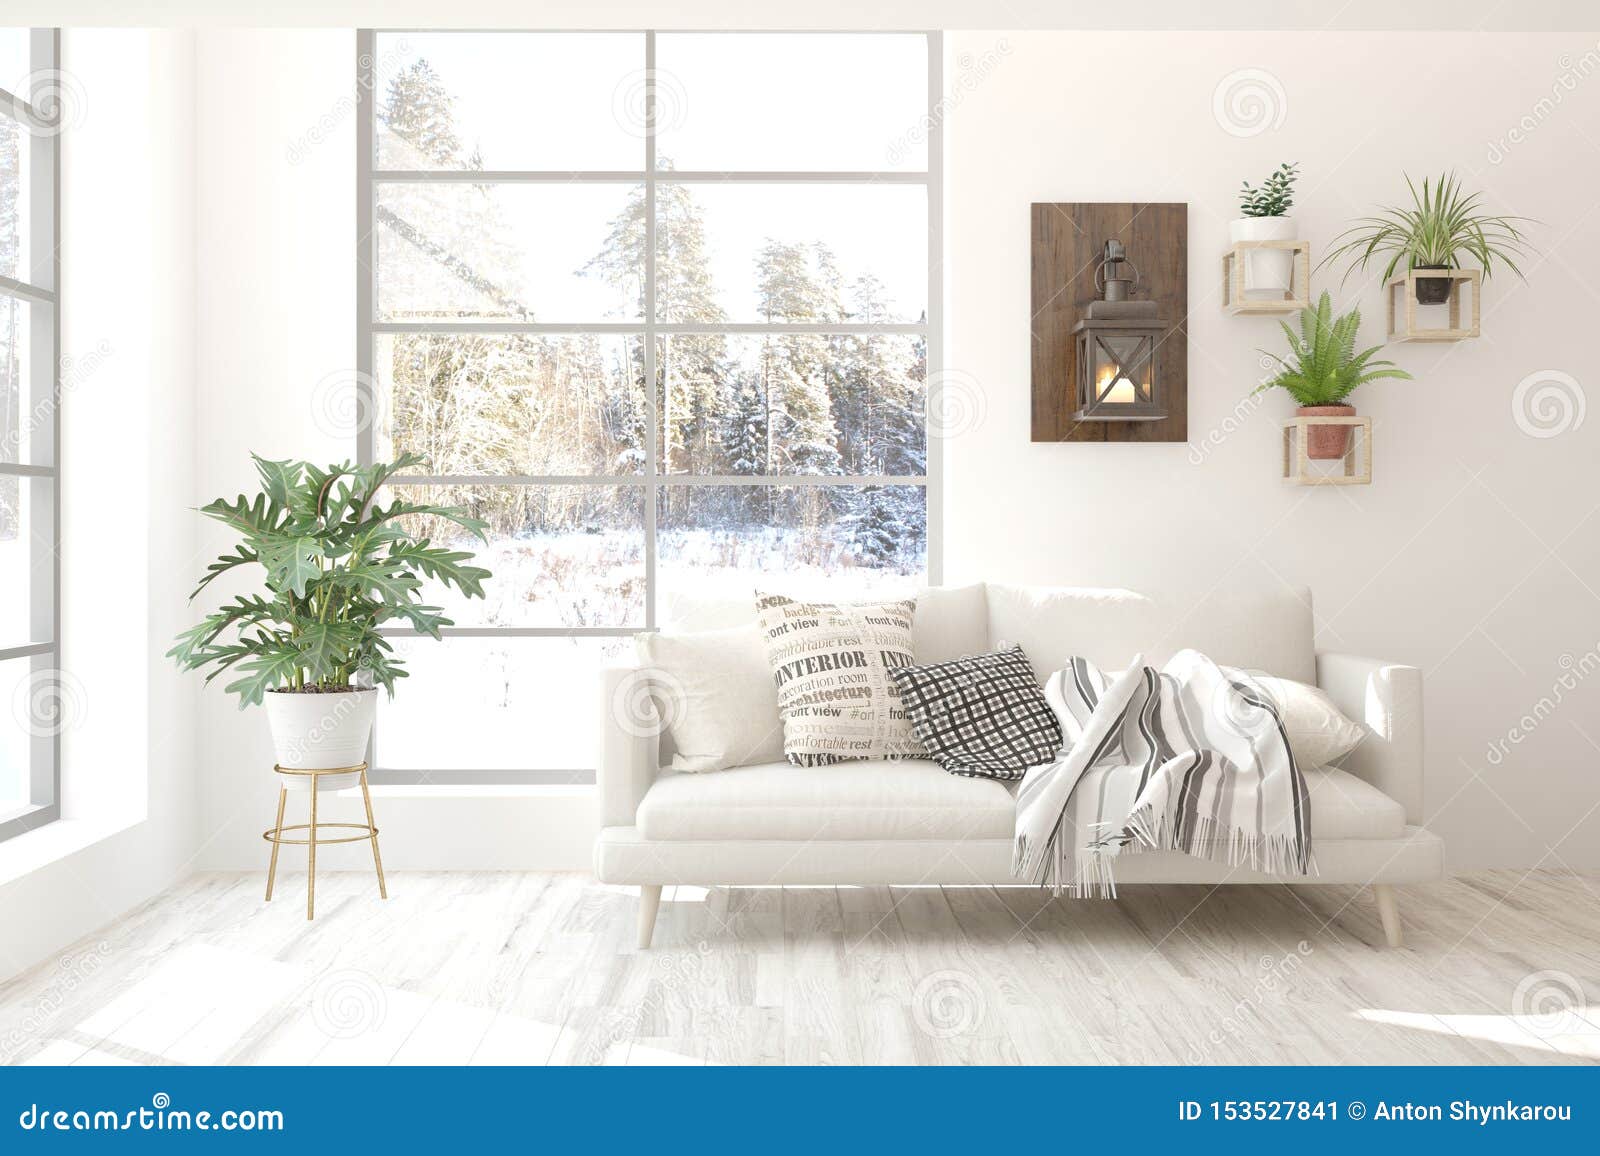 Stylish Room In White Color With Sofa And Winter Landscape In Window Scandinavian Interior Design 3d Illustration Stock Illustration Illustration Of Background Home 153527841